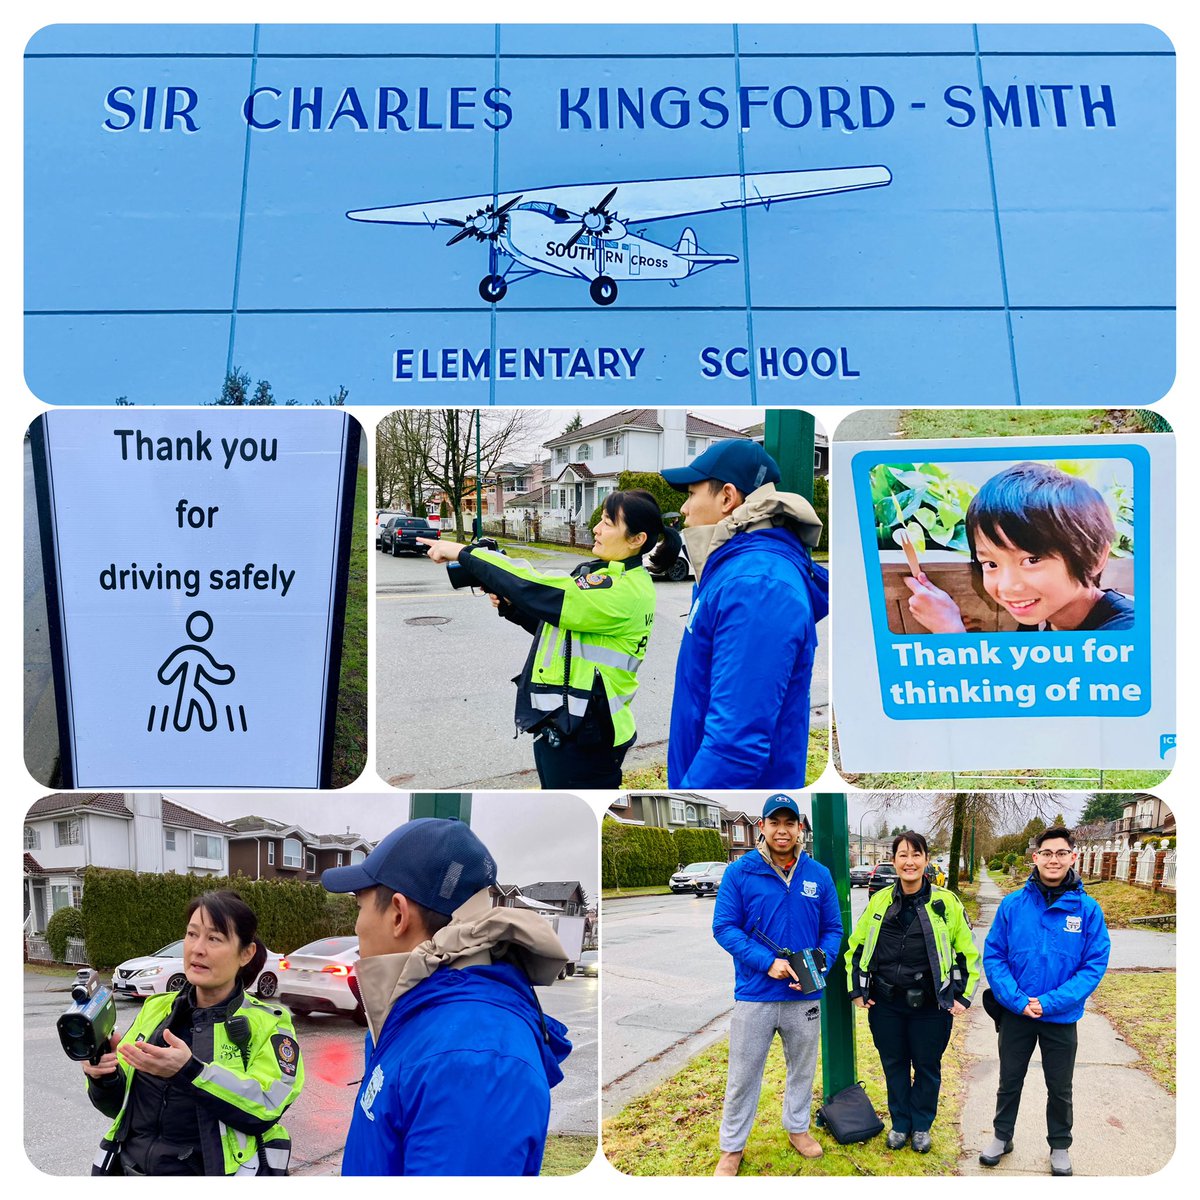 Happening now: @svcpc #VPD Volunteers Speed Watch with @VPDTrafficUnit CREST team at Kingsford Smith Elementary @VSB39 reminding motorists on this ☔️ morning to slow down @CityofVancouver #NoNeedForSpeed @icbc